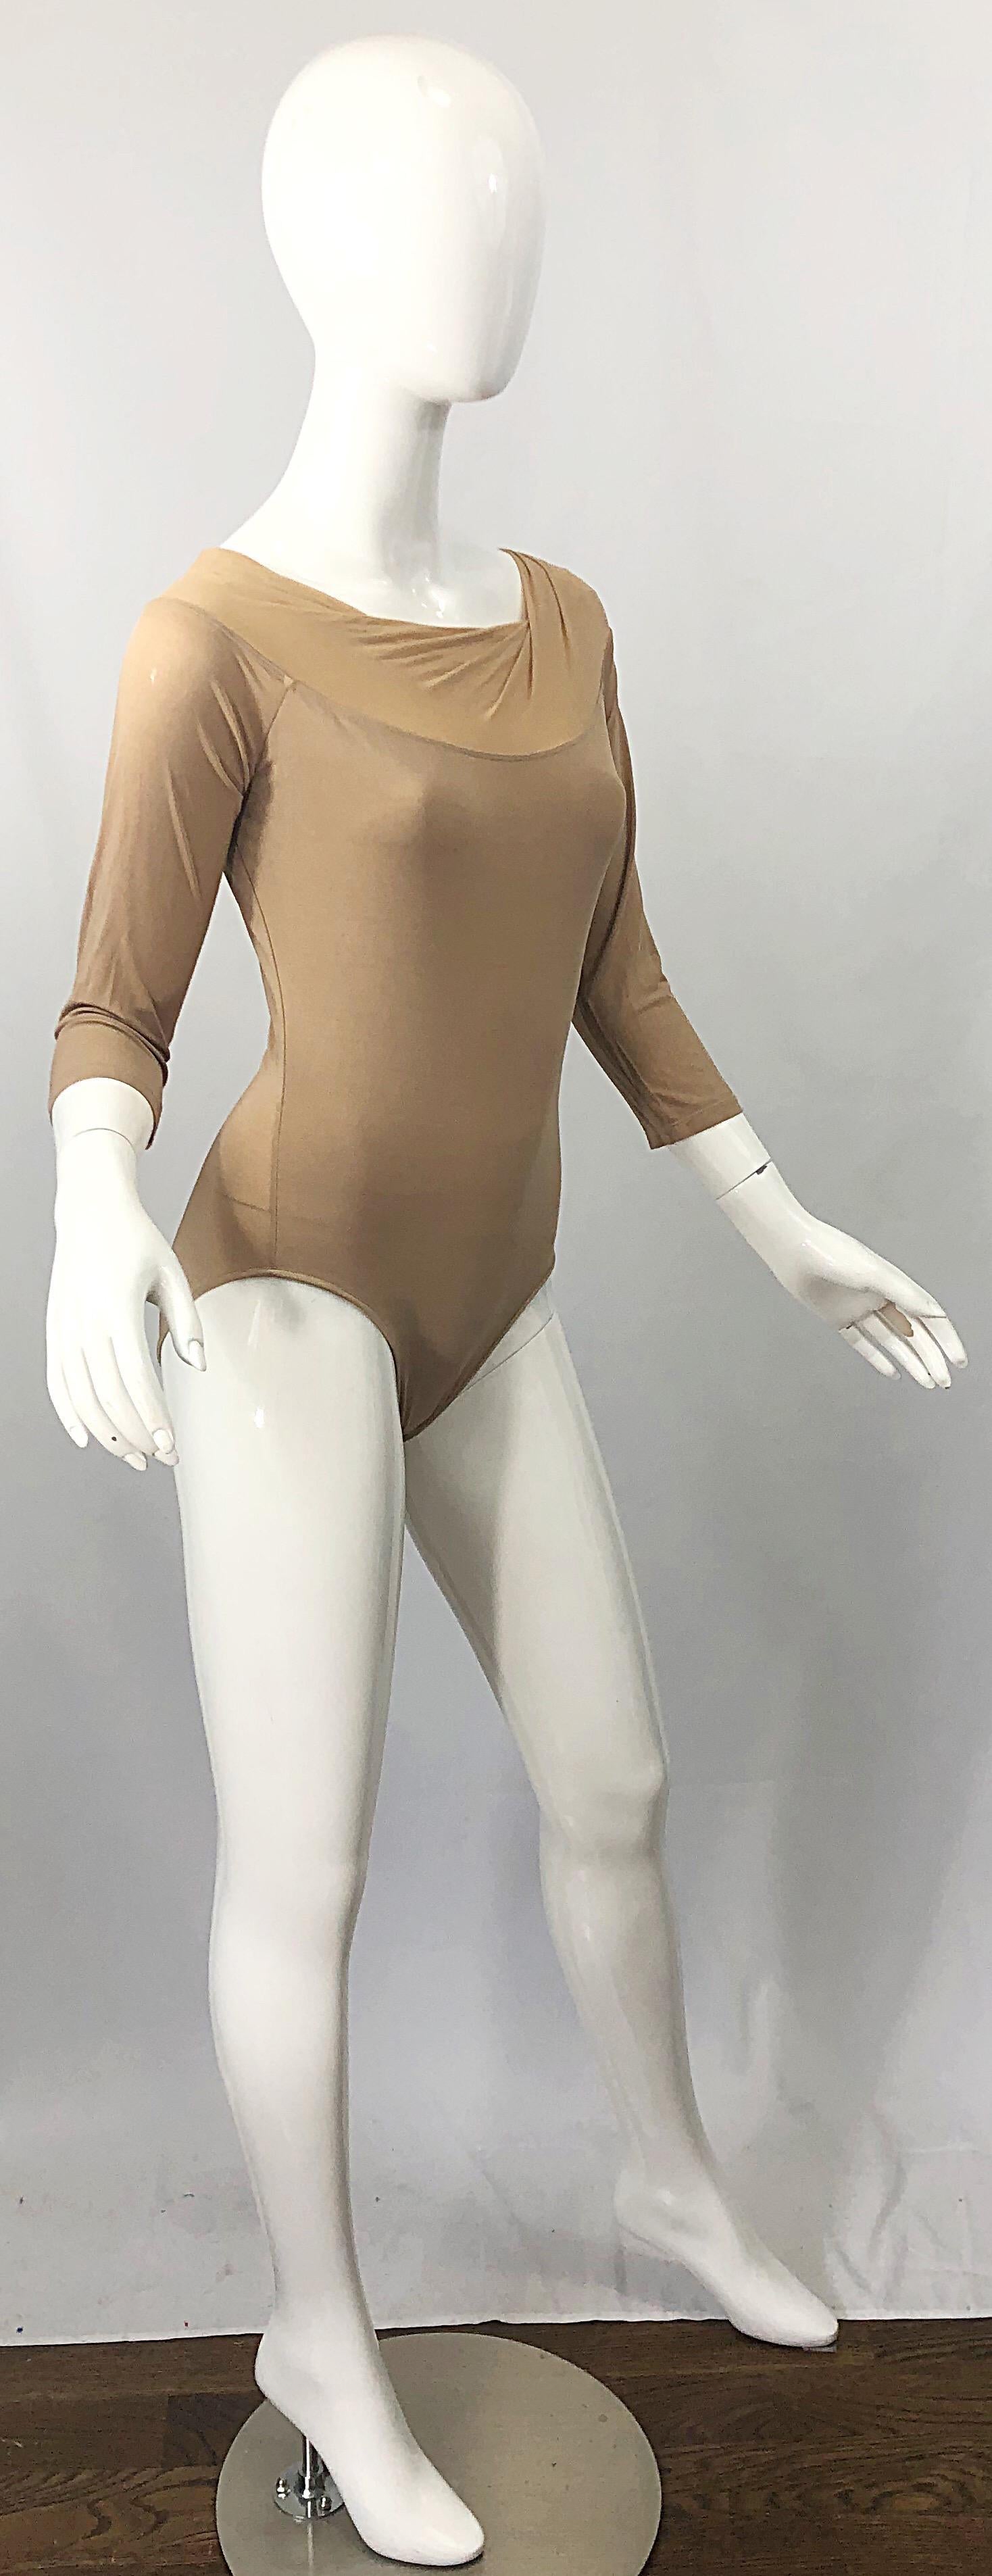 NWT $950 Donna Karan Collection 1990s Camel Nude 3/4 Sleeve One Piece Bodysuit M 10